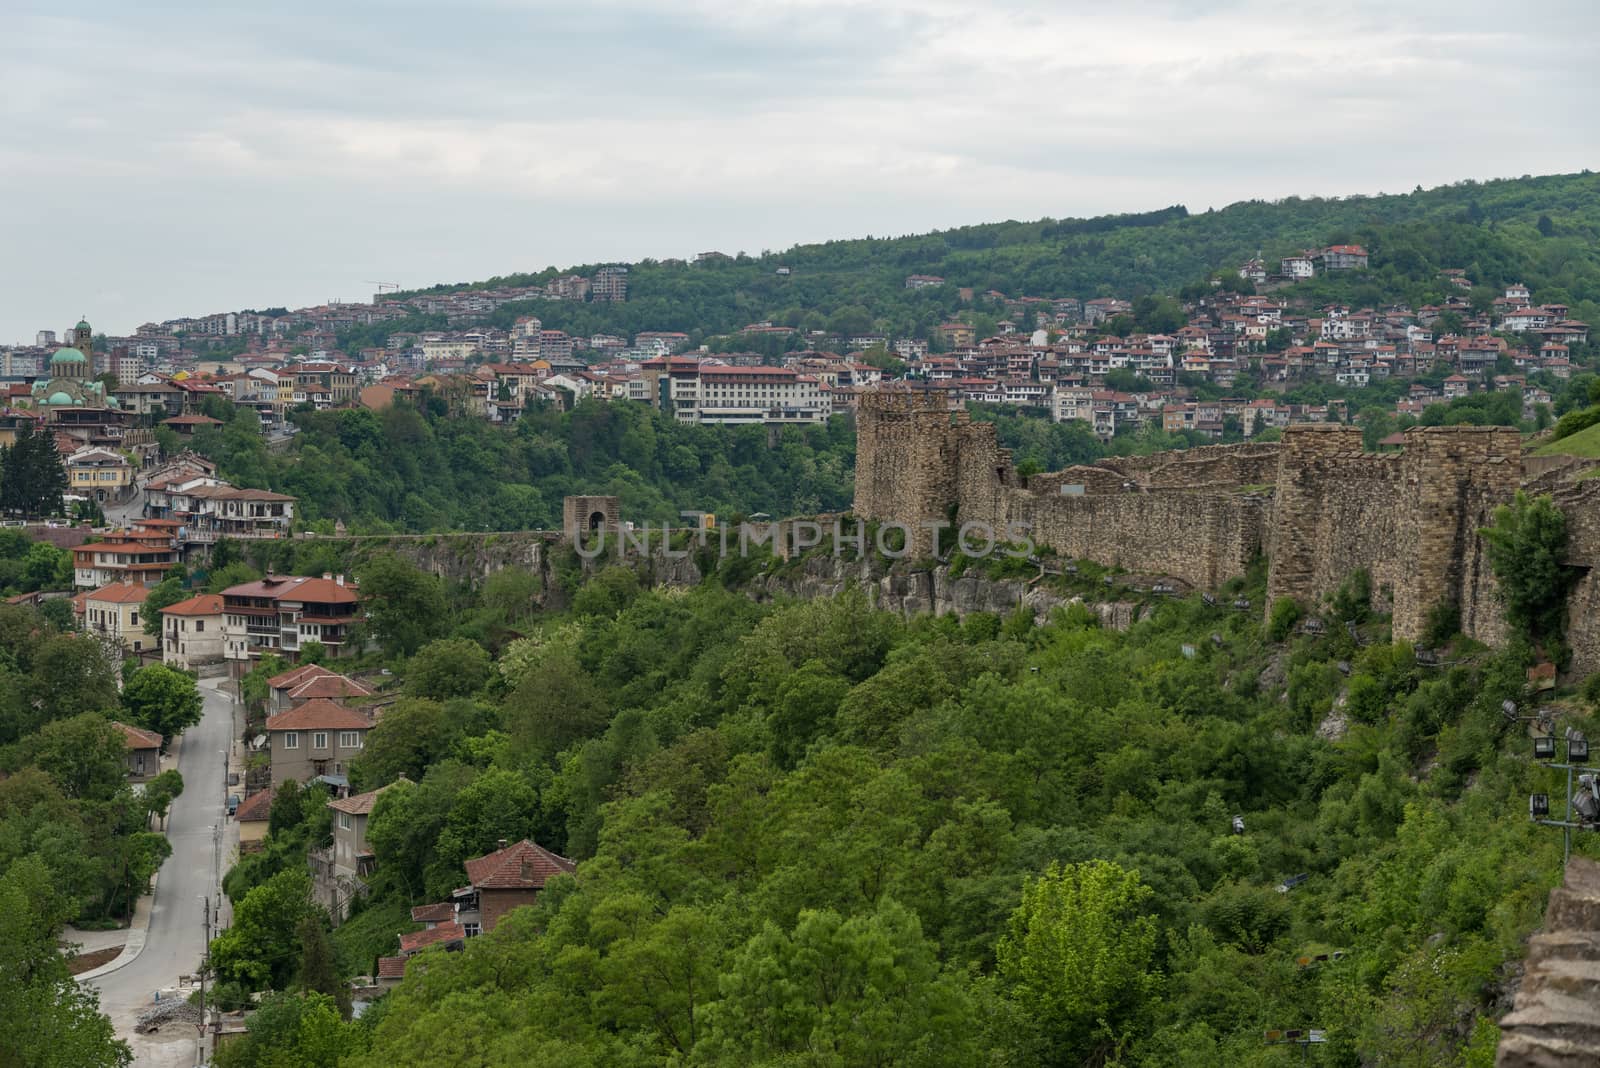 Veliko Tarnovo, Bulgaria - 8 may, 2019:  Gate tower and ruins of Tsarevets fortress with a view of the old town of Veliko Tarnovo in the background, Bulgaria